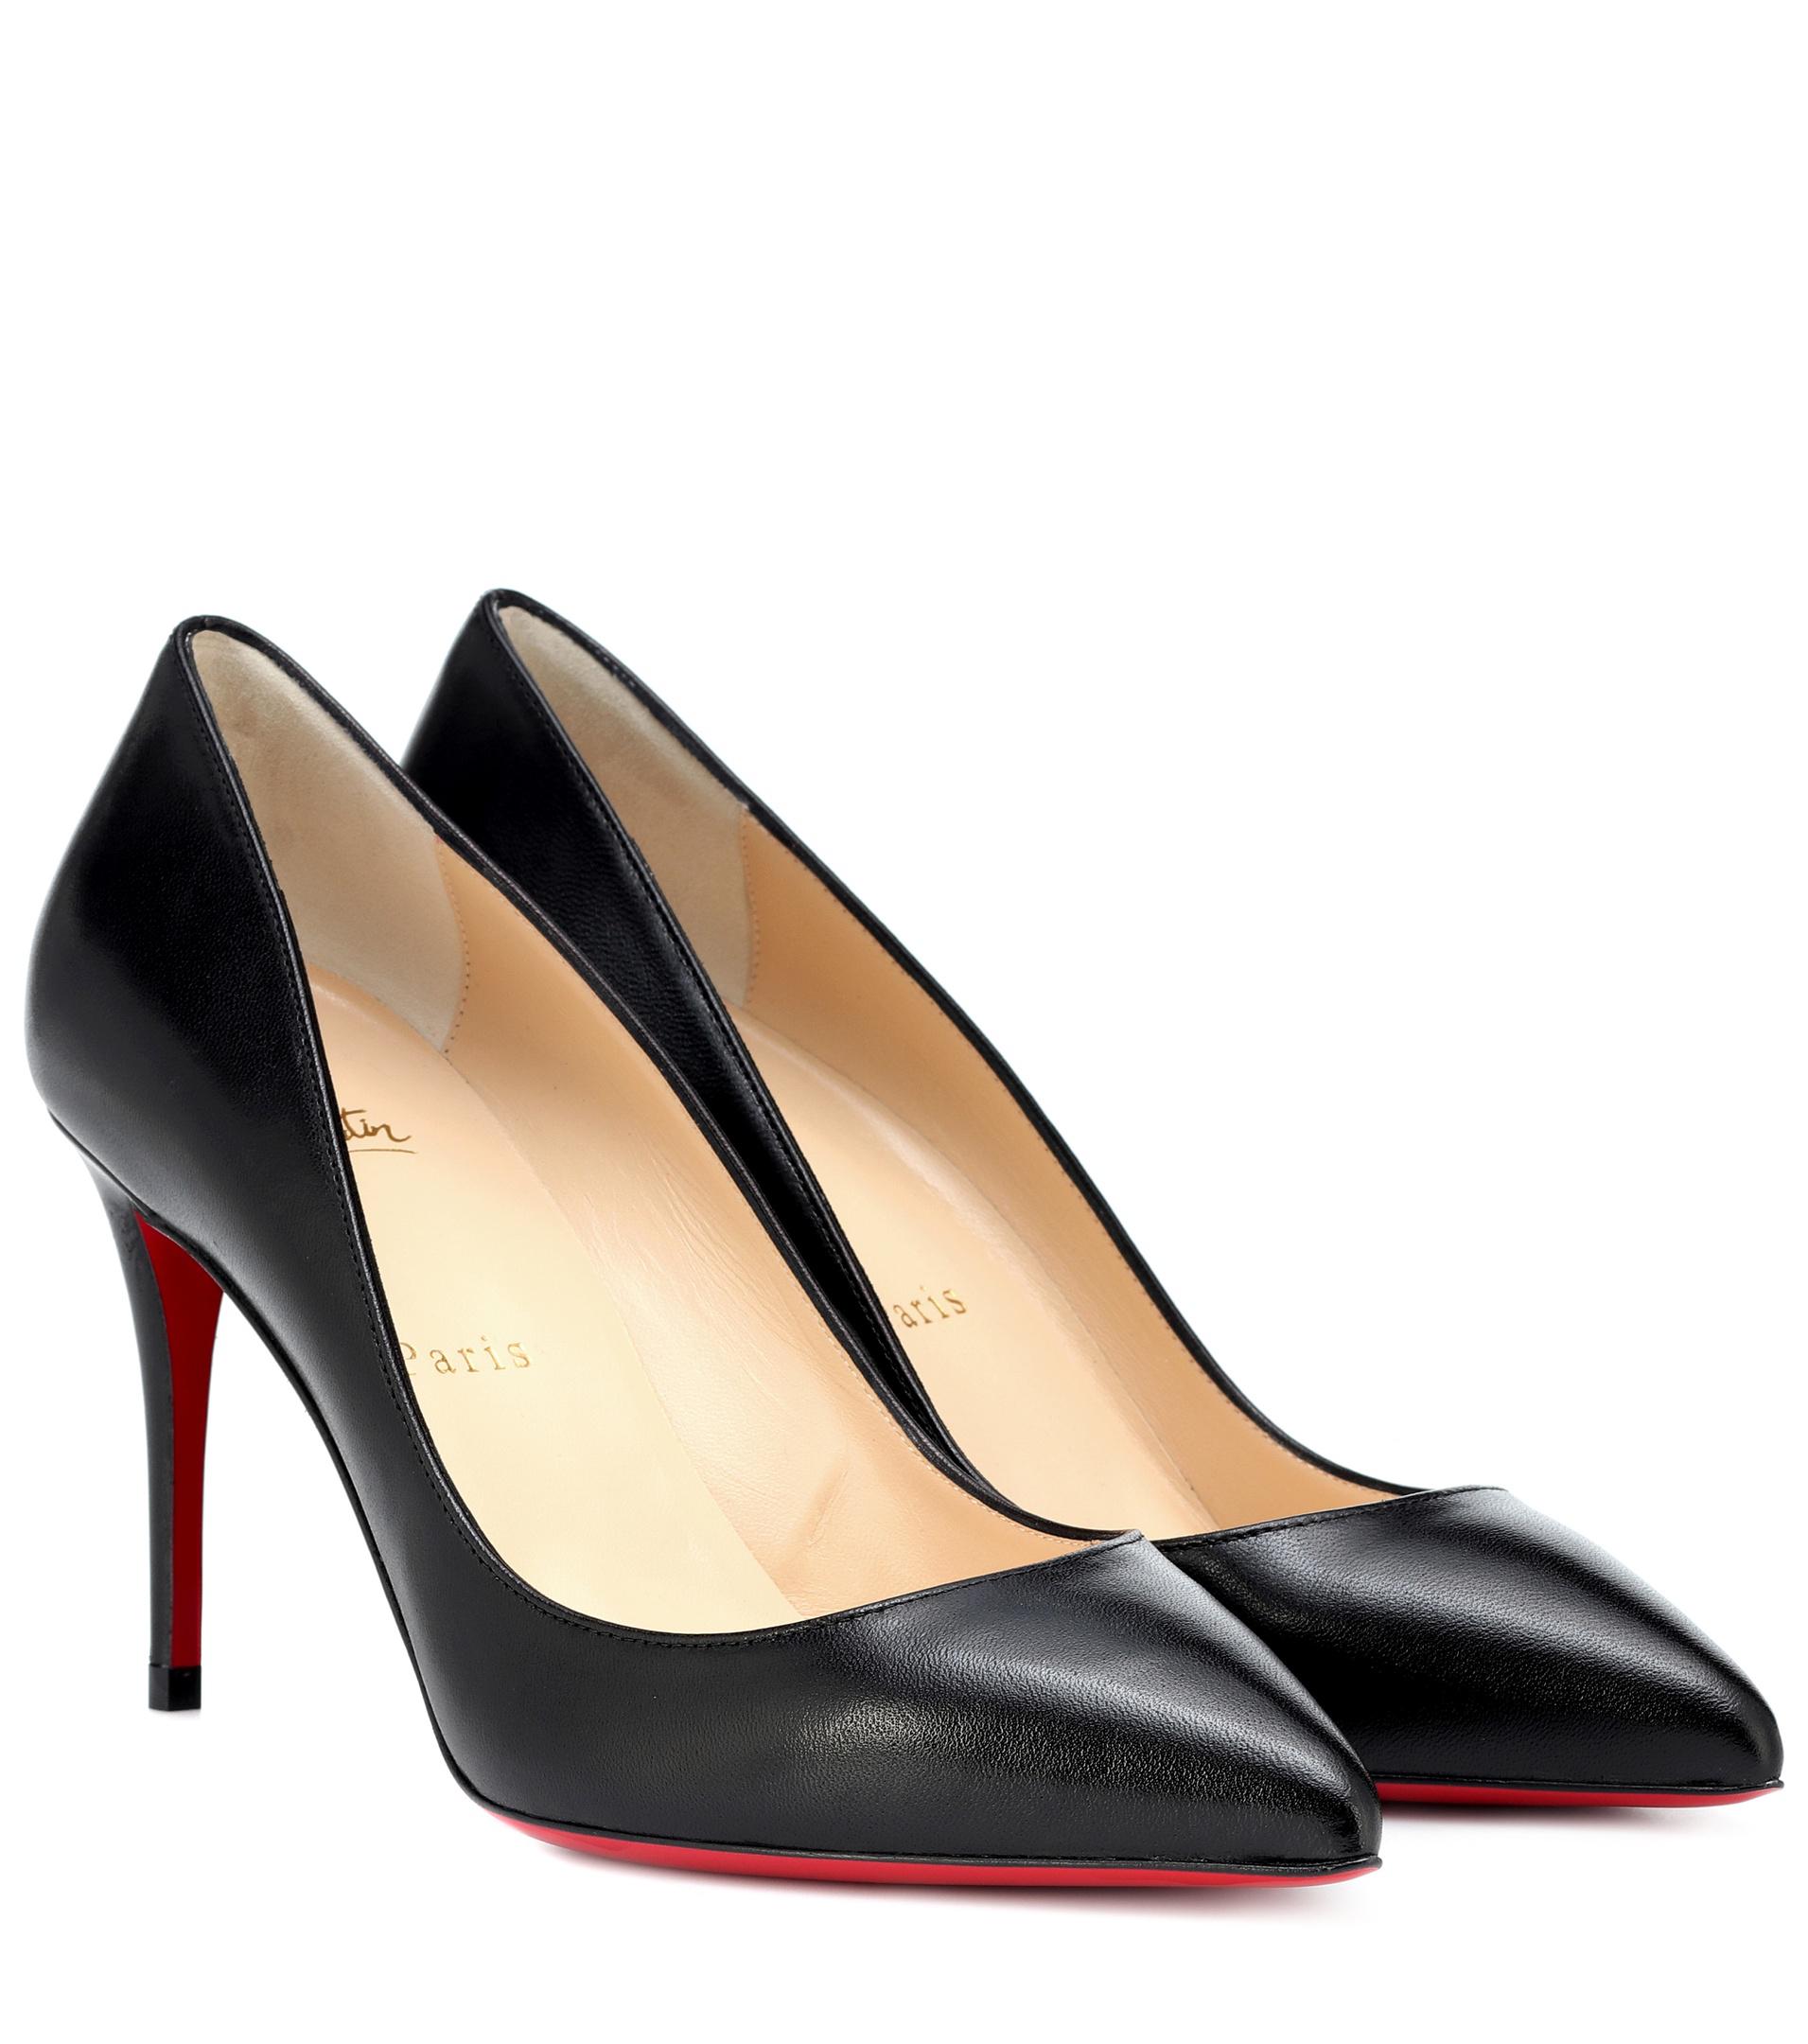 Lyst - Christian Louboutin Pigalle Follies 85 Leather Pumps in Black